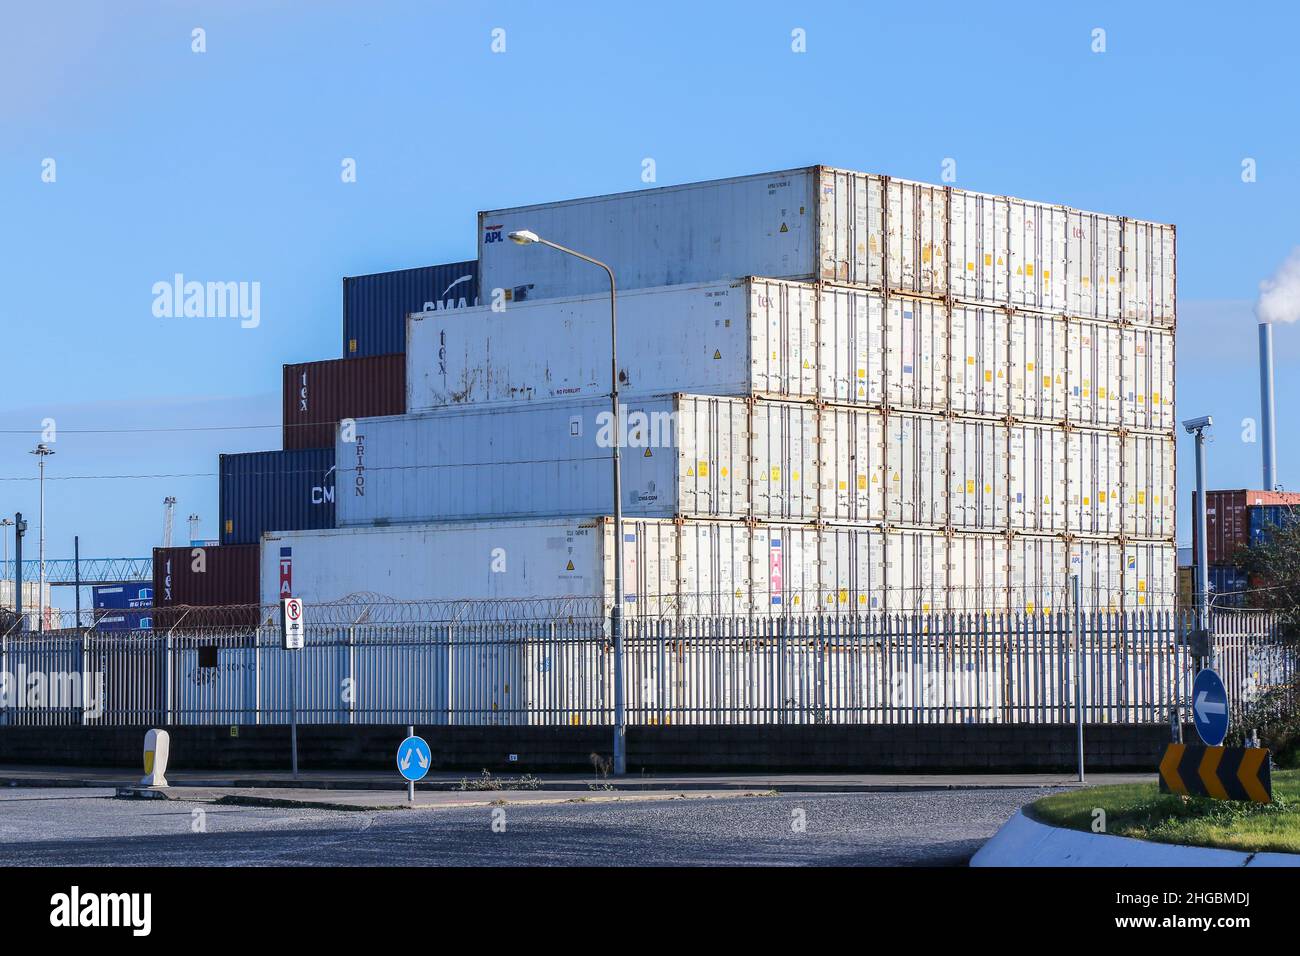 Stack of white shipping crates in stepped layout with linear pattern. Blue and brown containers beyond. Shipping industry at port. Dublin, Ireland Stock Photo